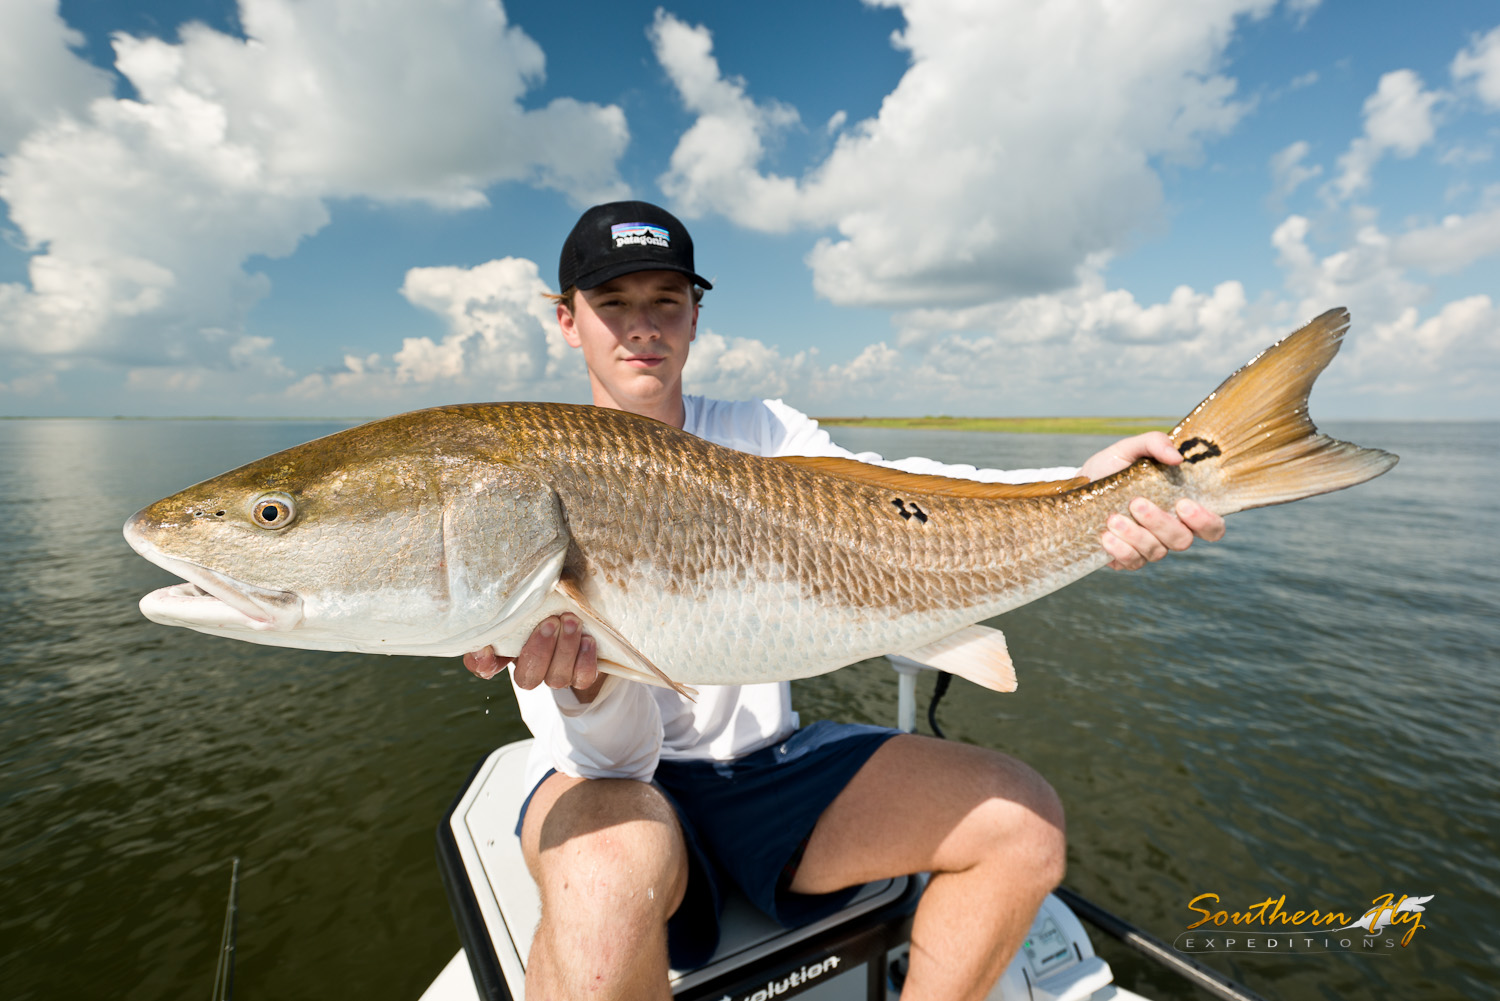 2019-08-03_SouthernFlyExpeditions_NewOrleans_CharlesStone-9.jpg